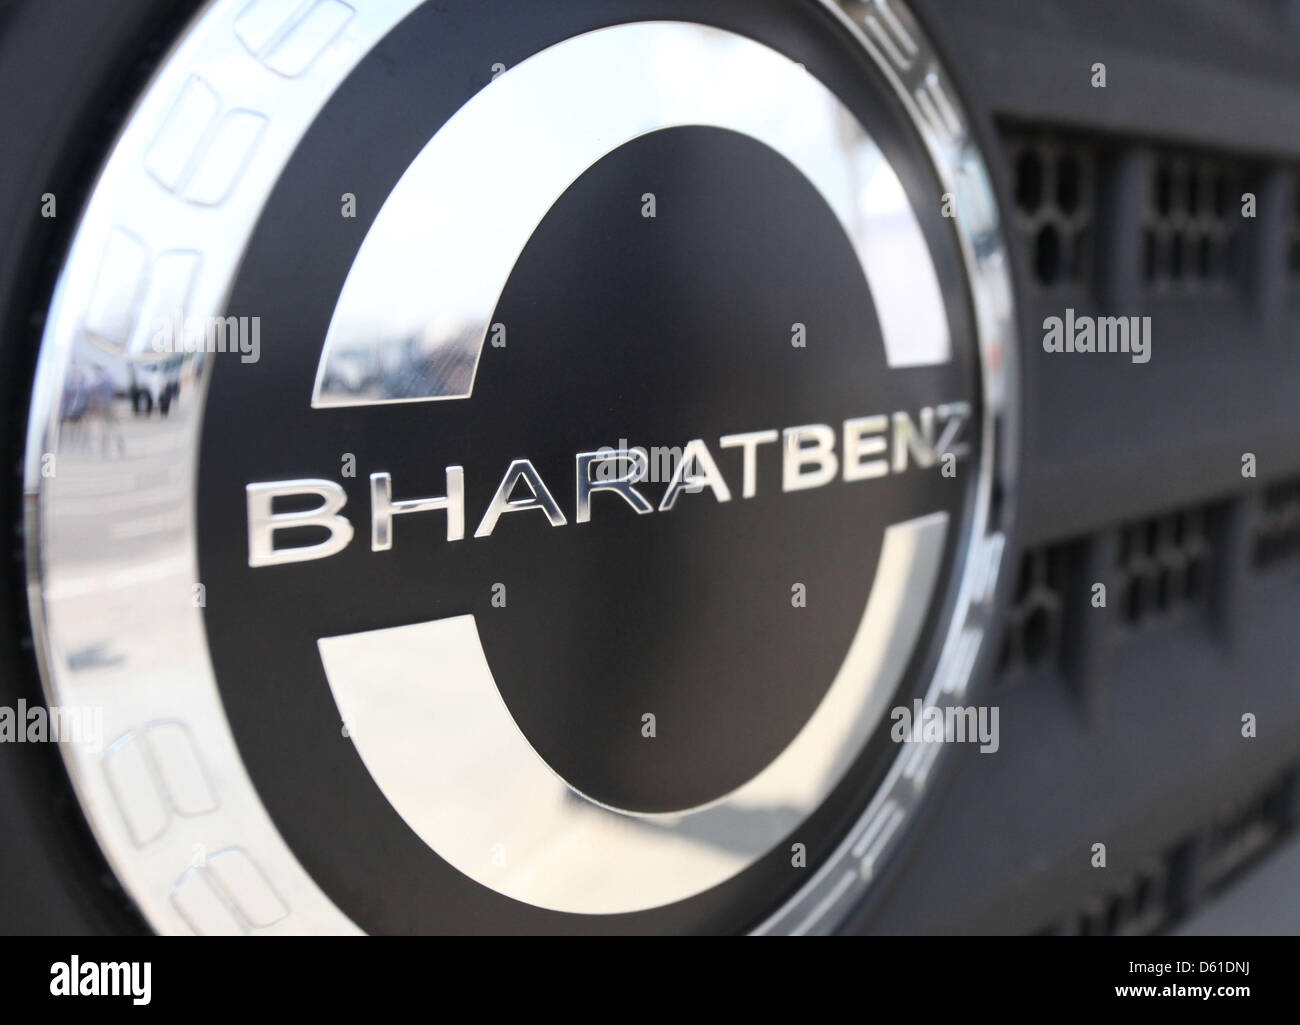 The logo of the new Daimler brand Bharat-Benz is seen on a truck at the new Daimler truck plant in Oragadam, India, 18 April 2012. Car manufacturer Daimler enters the Indian market for trucks with its own plant. The Indian truck market is already the tird largest of its kind in the world and keeps growing rapidly. The new plant in Oragadam will produce medium and heavy trucks under Stock Photo